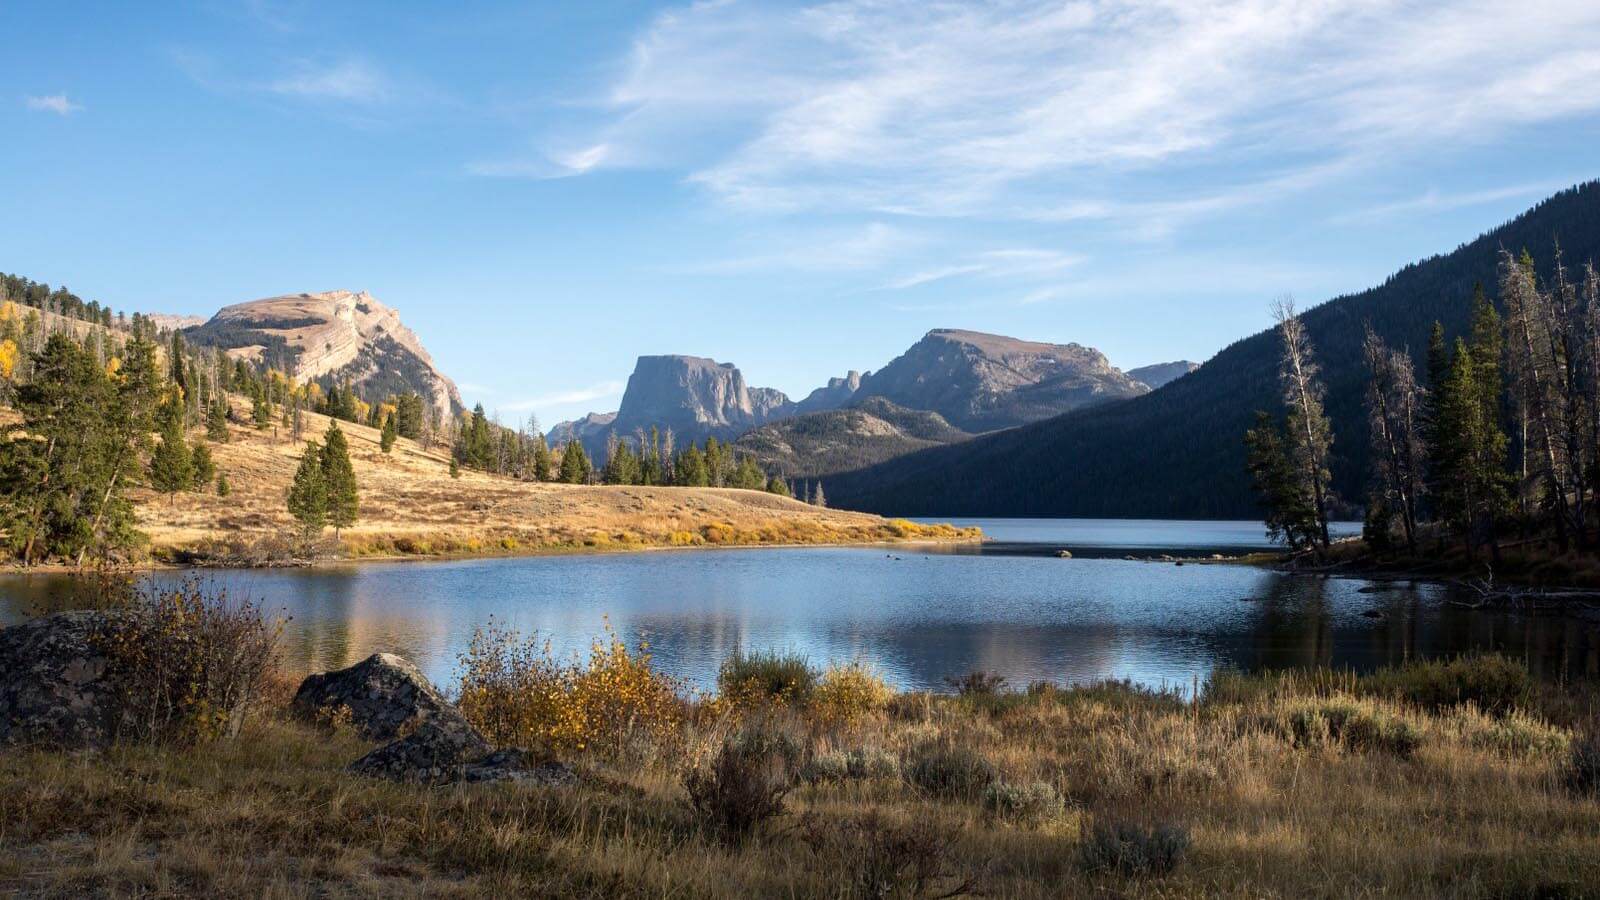 Like the Tetons? You’ll Love these Nearby Hidden Gems